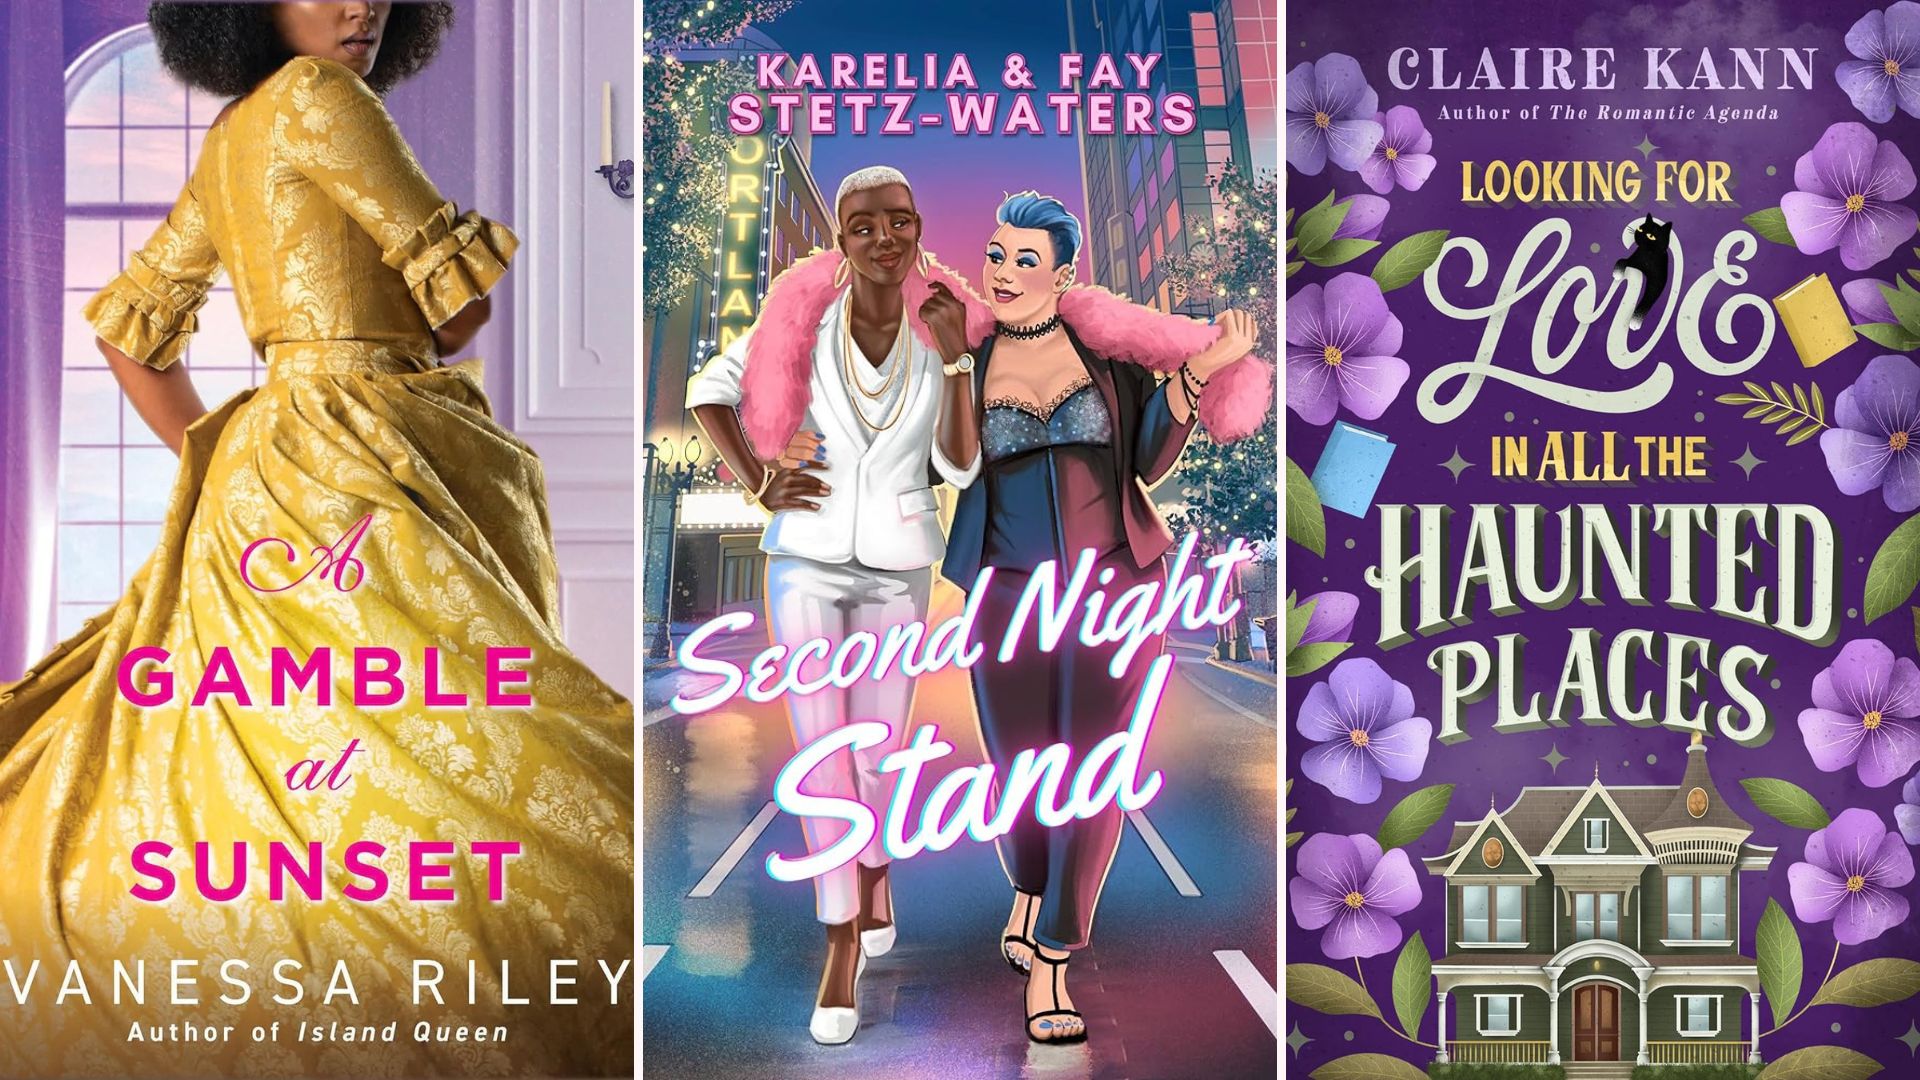 Book covers for A Gamble at Sunset, Second Night Stand, and Looking for Love in All the Haunted Places